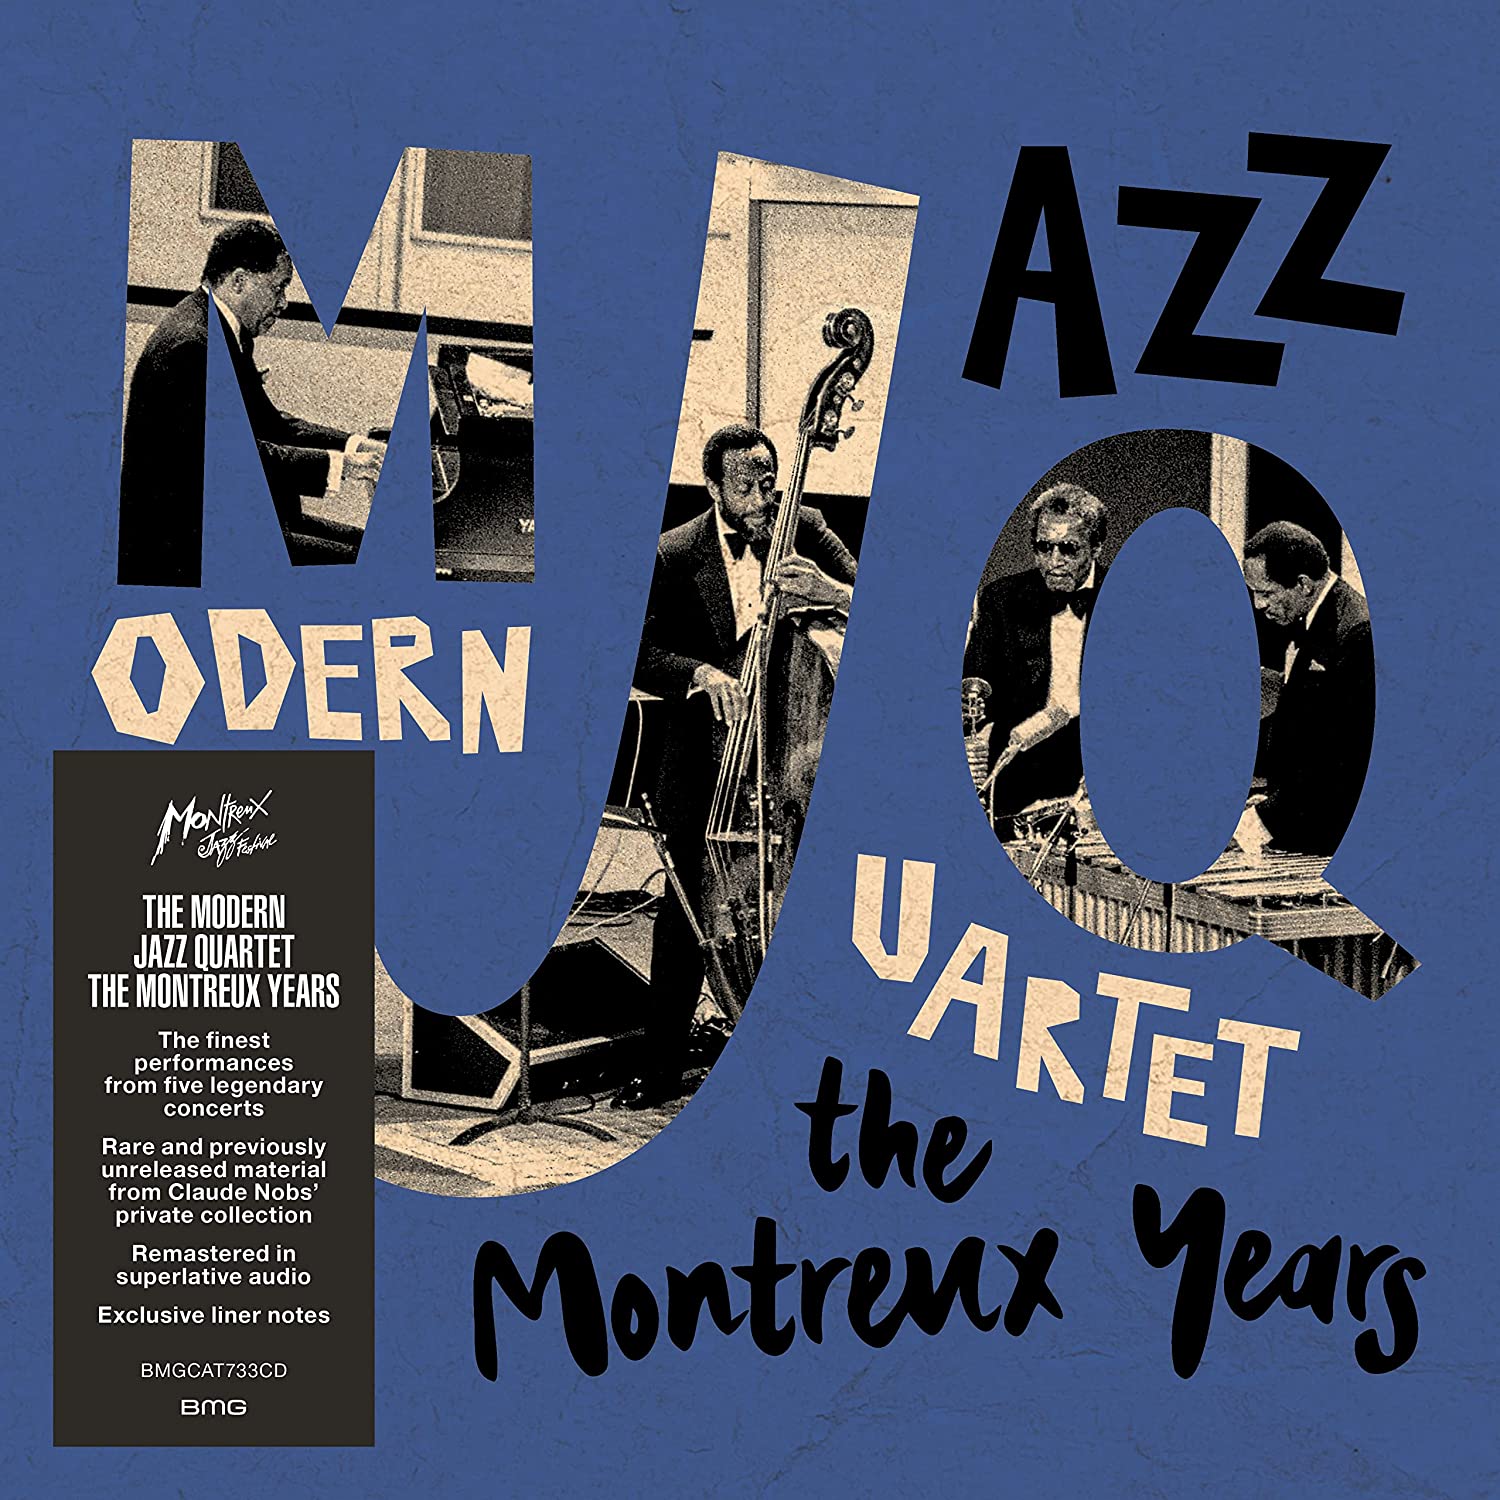 THE MODERN JAZZ QUARTET - The Montreux Years cover 